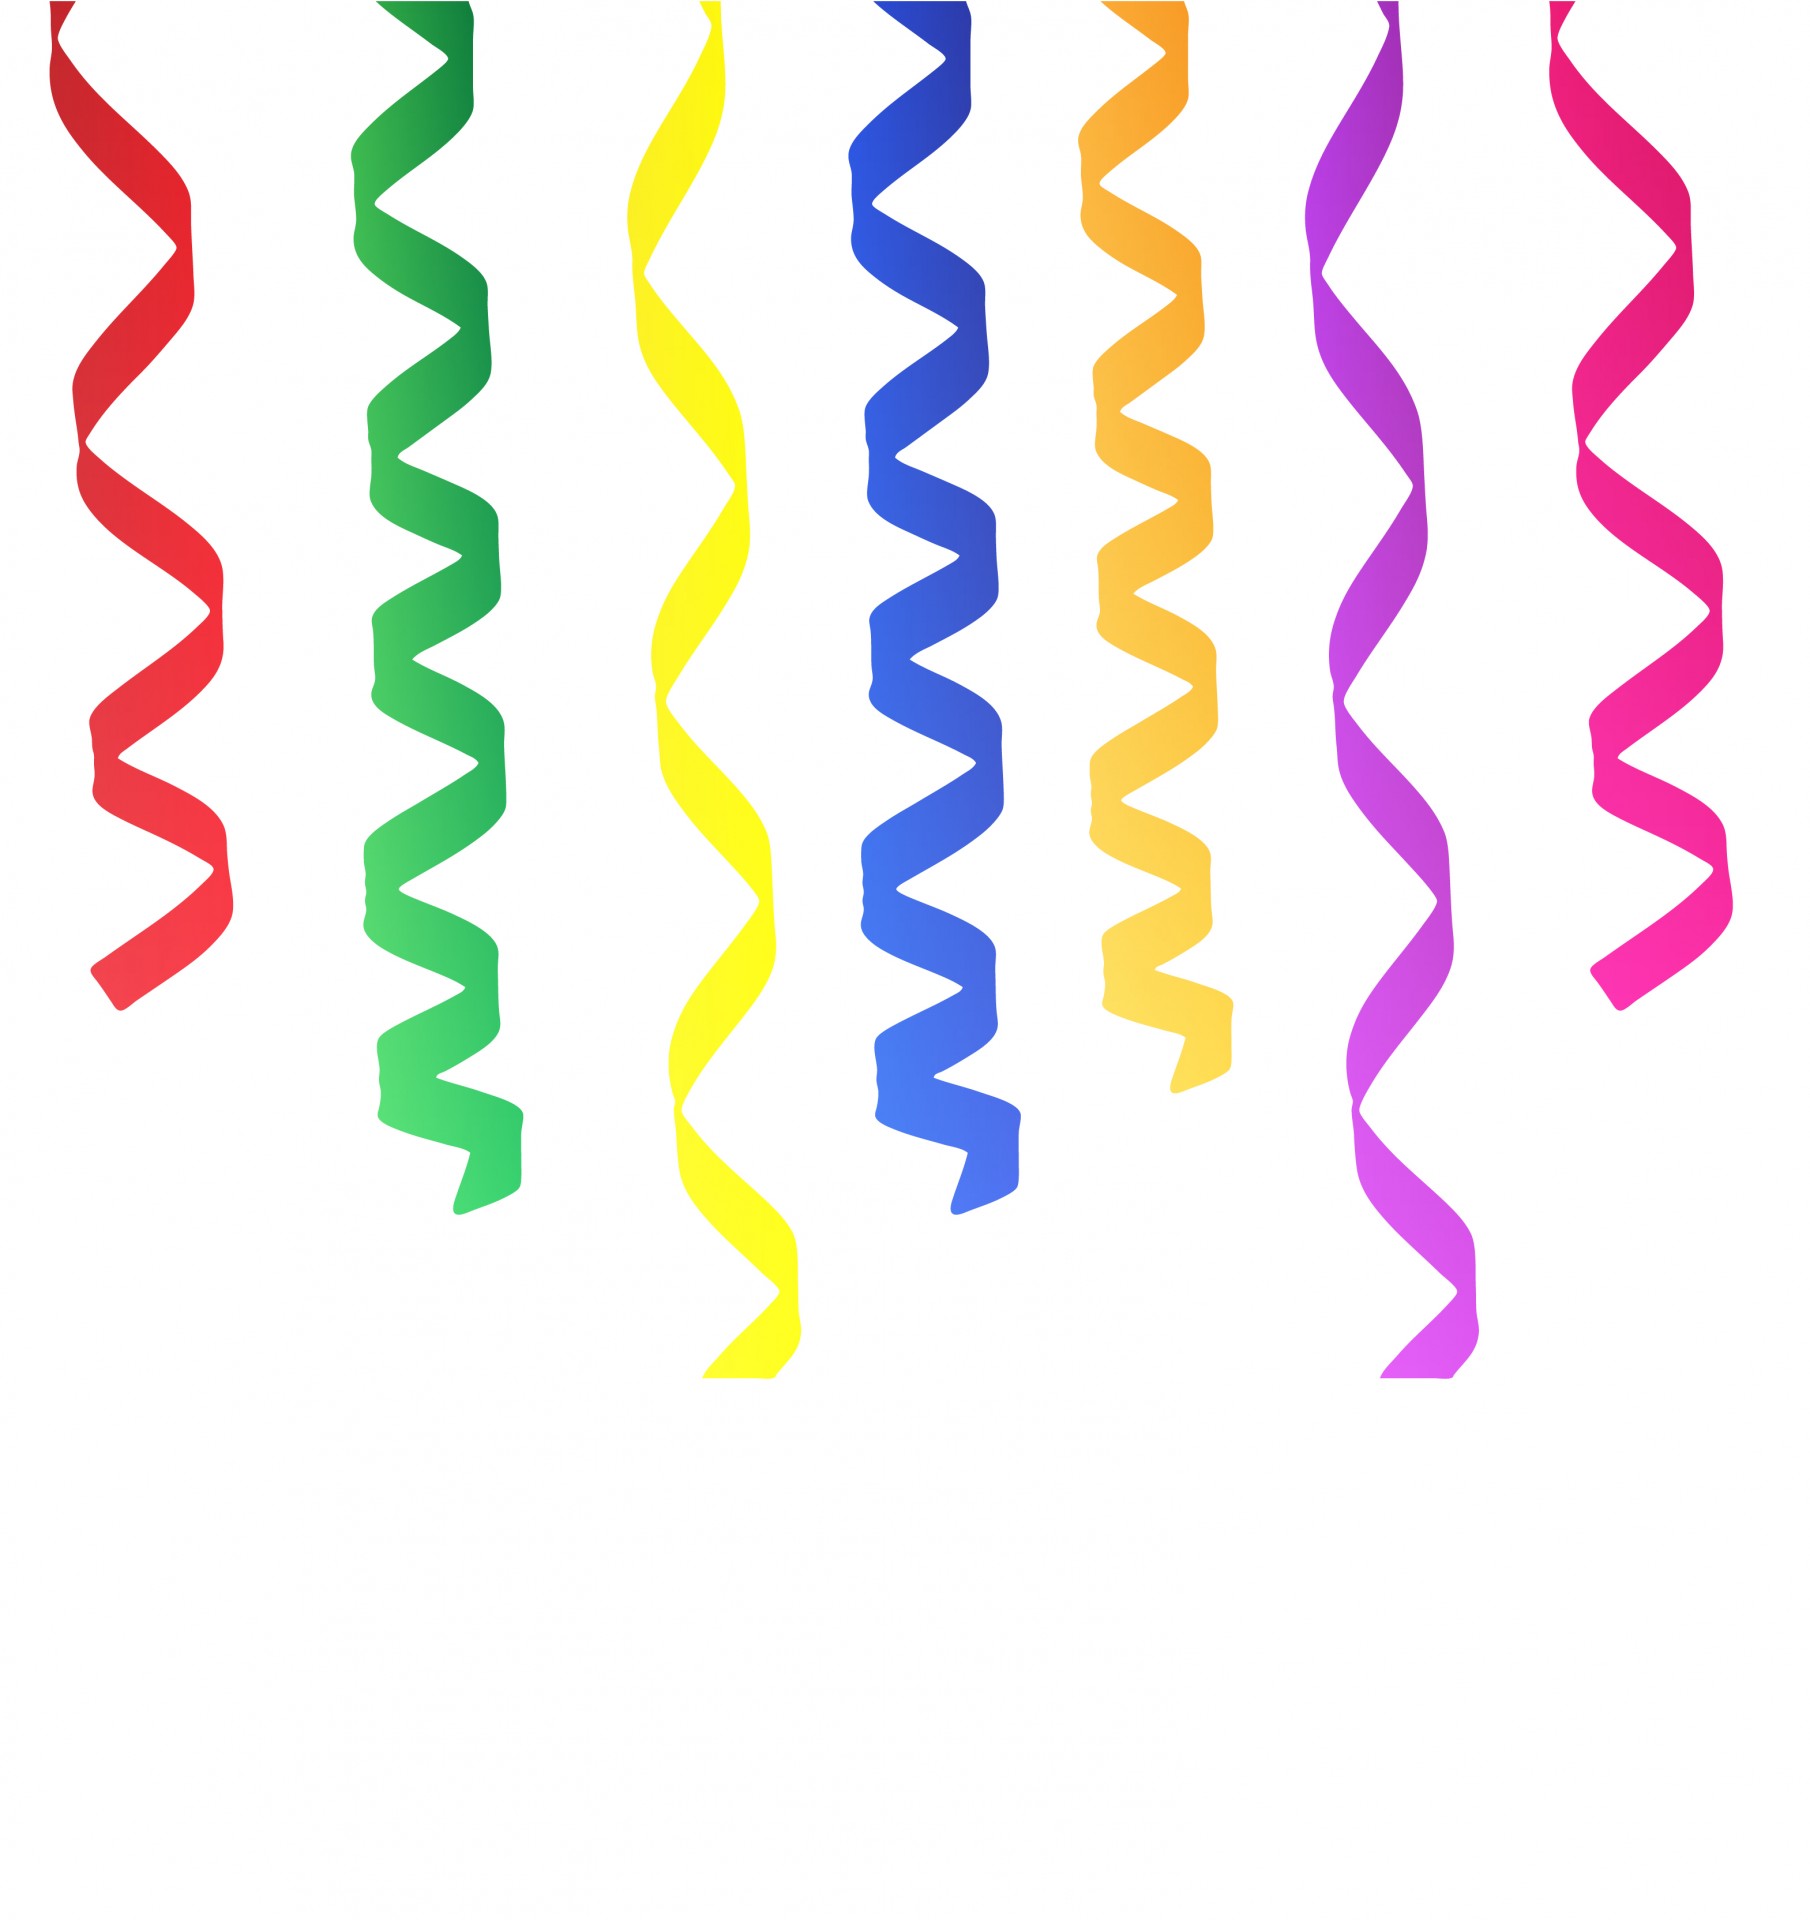 Streamers, Ribbons Colorful Clipart Free Stock Photo.